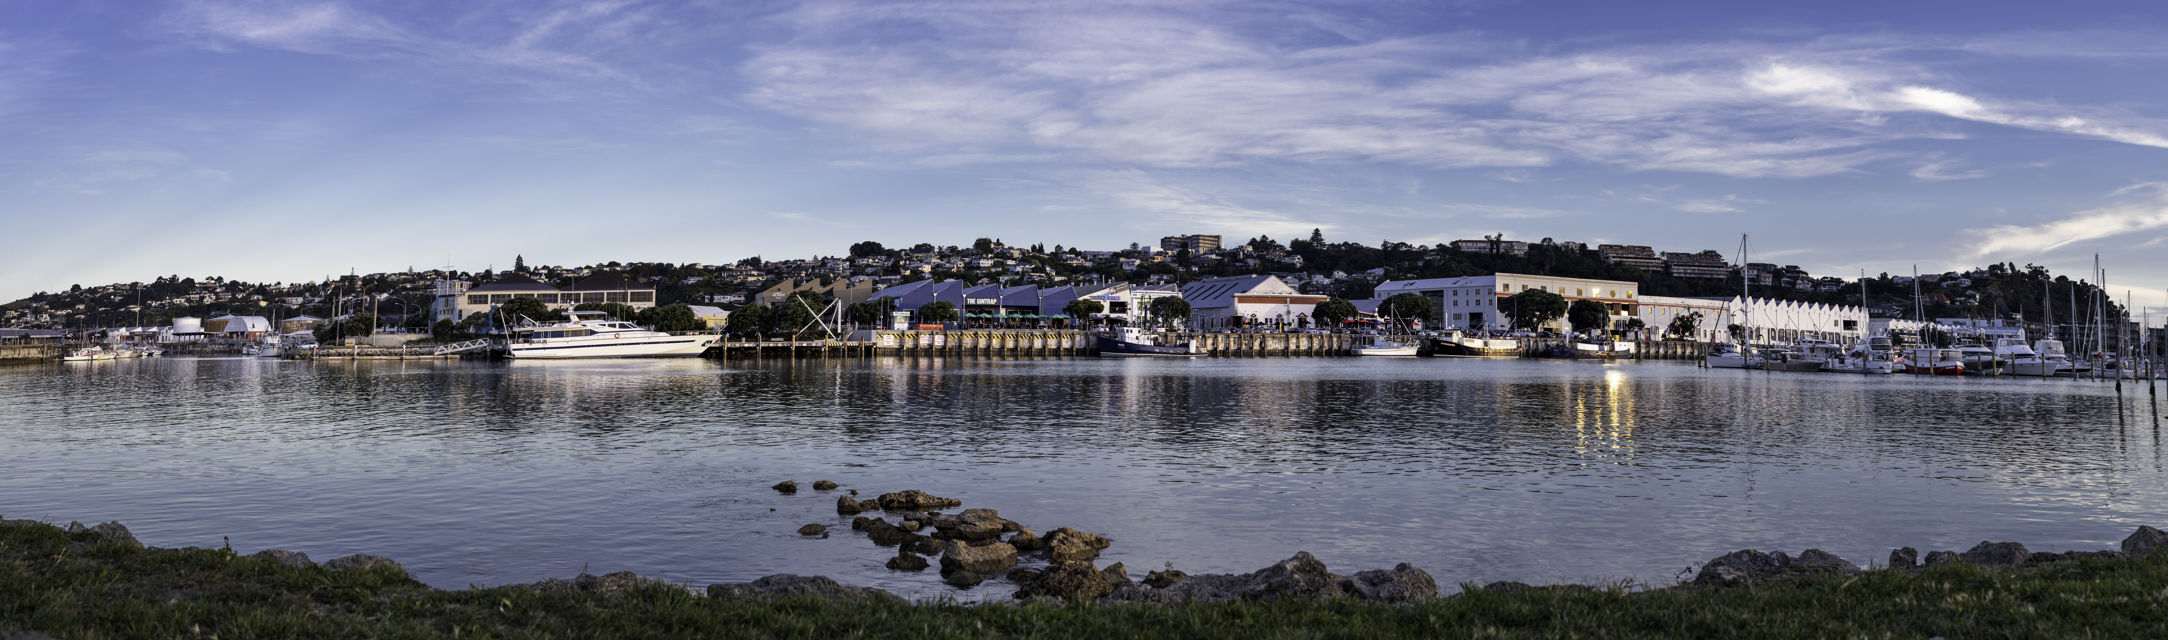 Ahuriri Evening - A summer evening looking over the Ahuriri inner harbour from Westshore